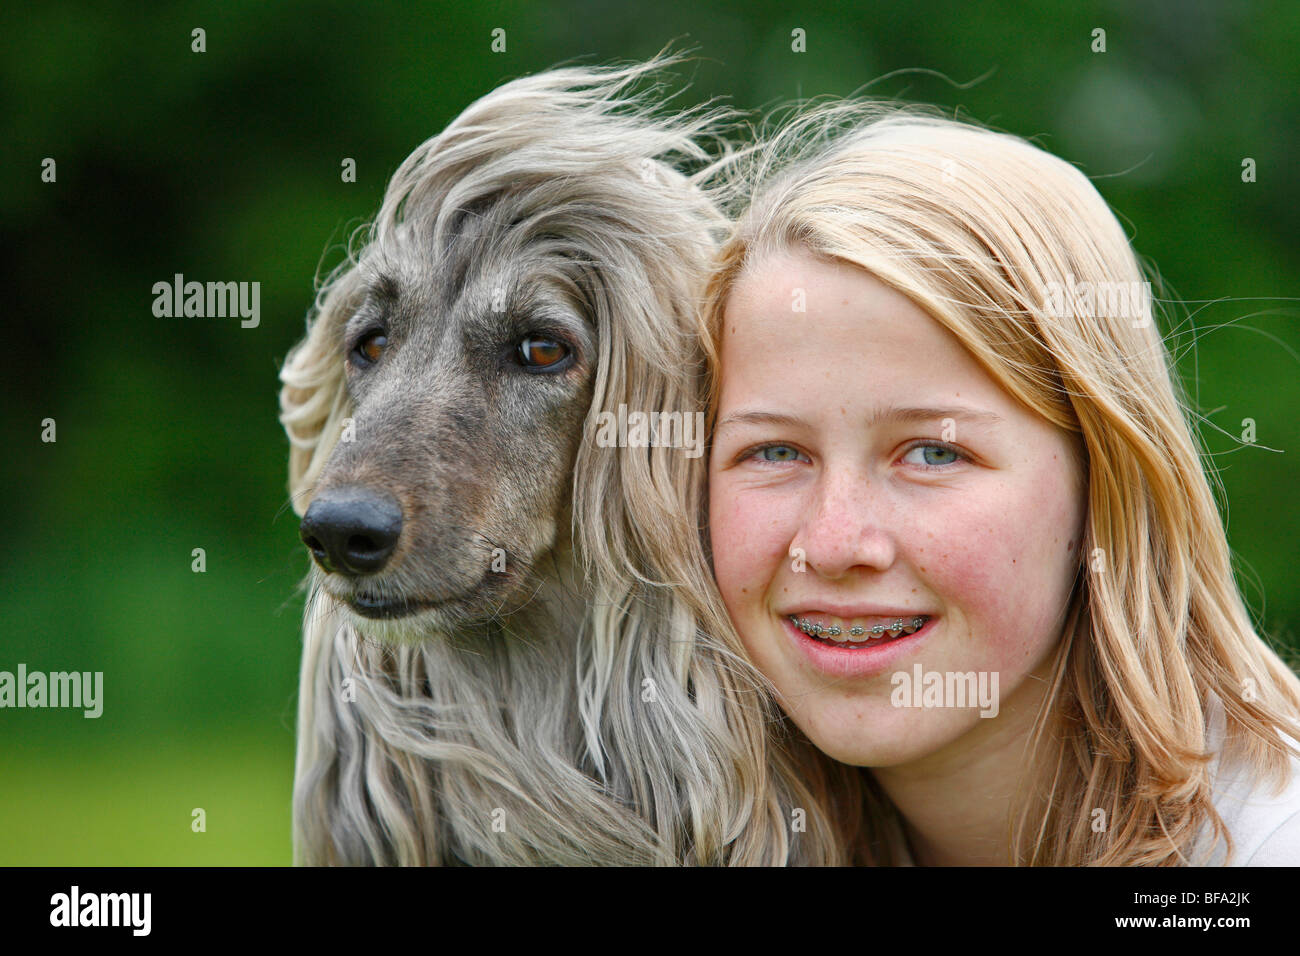 Afghanistan Hound, Afghan Hound (Canis lupus f. familiaris), girl leaning her head against that of a dog Stock Photo